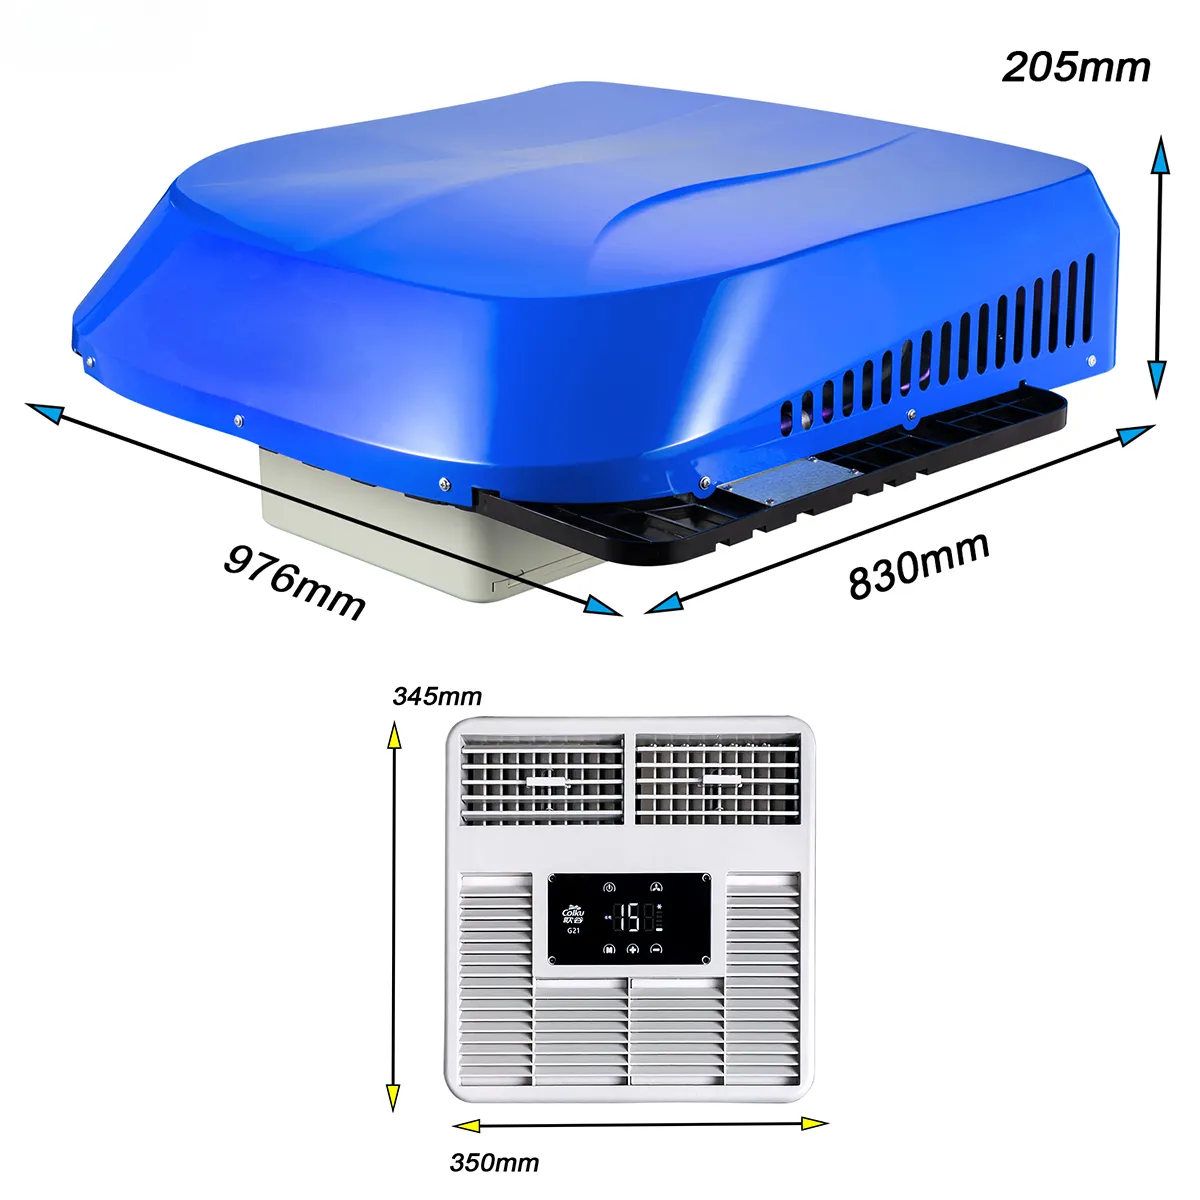 battery powered semi diesel sleeper truck sleeper cabin parking cooler roof top portable cooling air conditioner 12 volt 24v dc